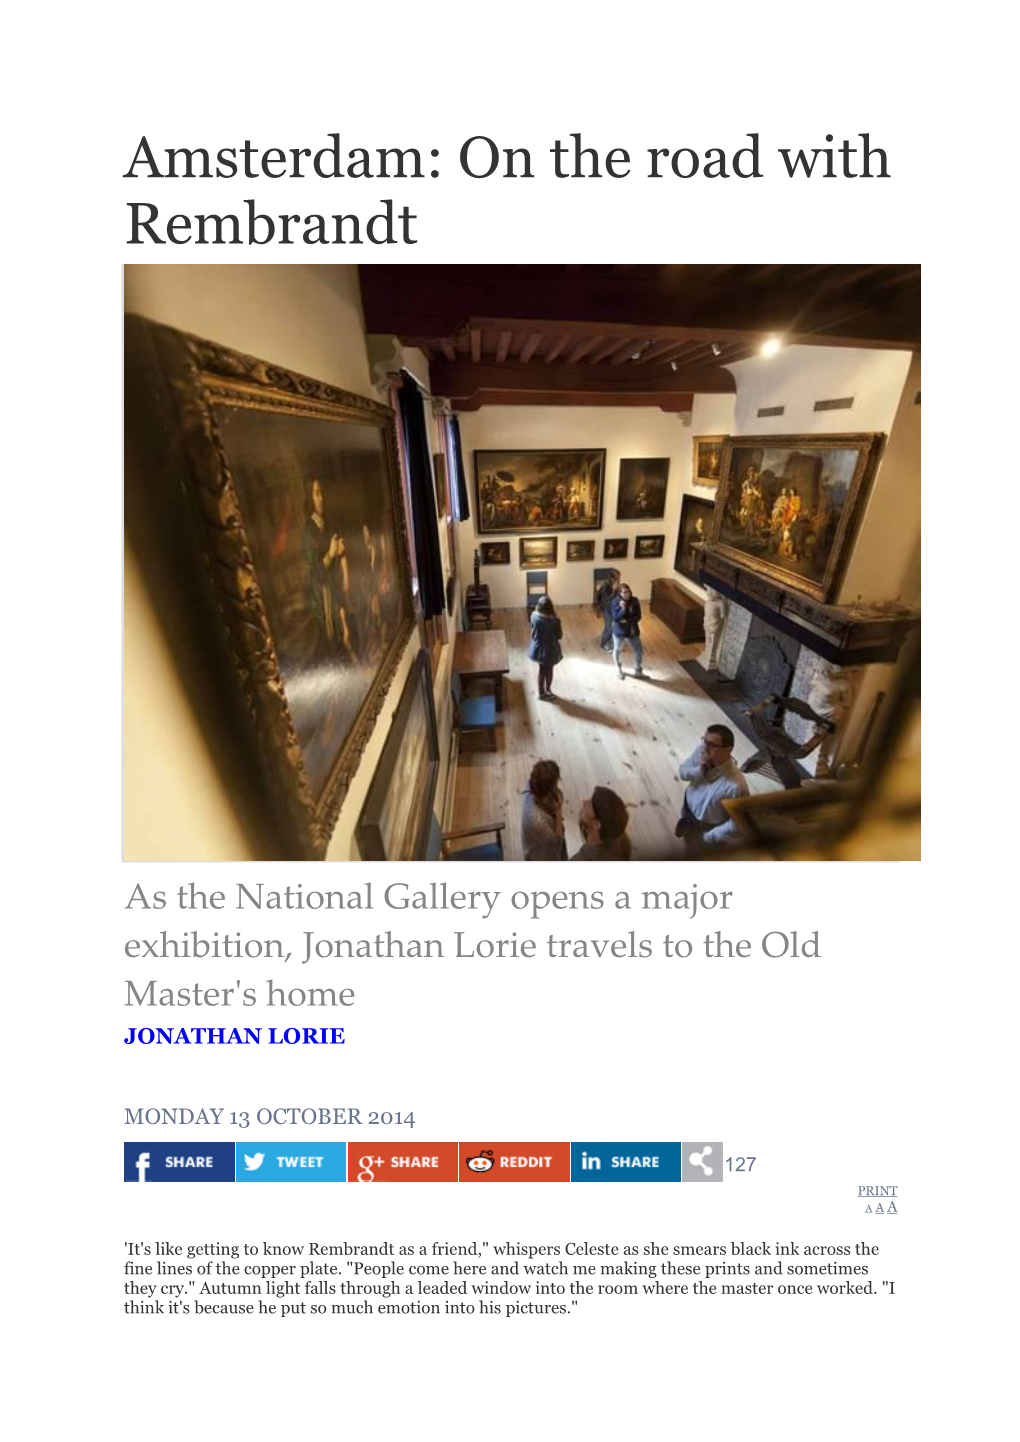 Amsterdam: on the Road with Rembrandt